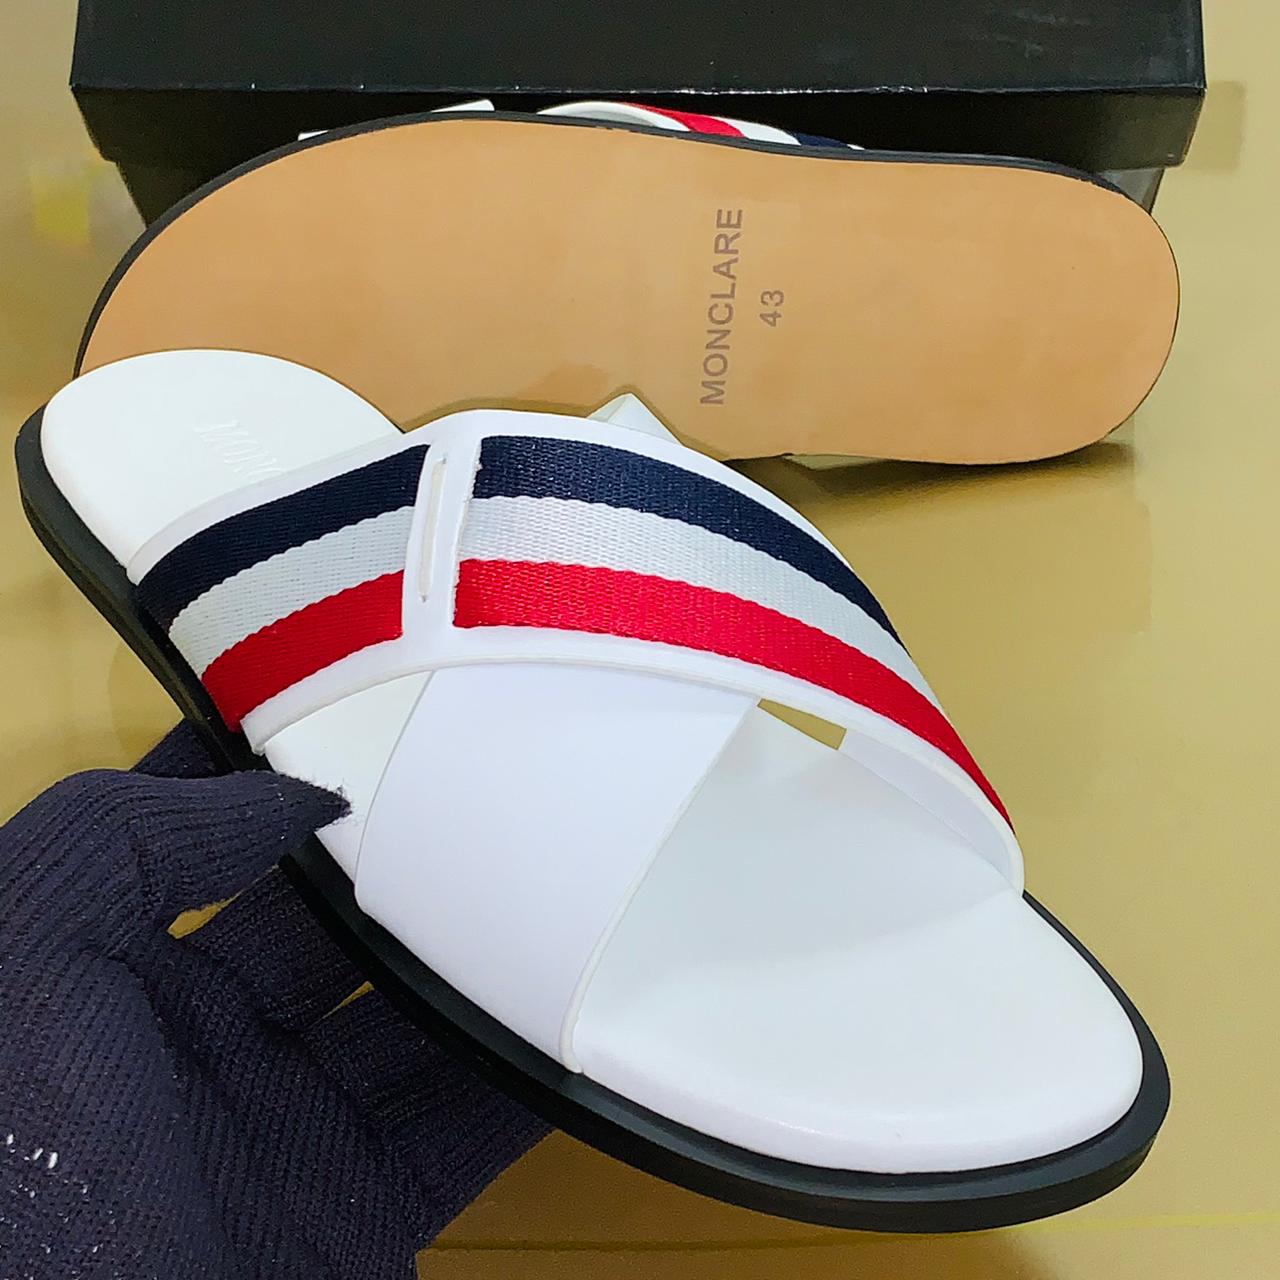 Louis vuitton designers palm slippers  Olist Men's Other Brand Slippers  shoes For Sale In Nigeria